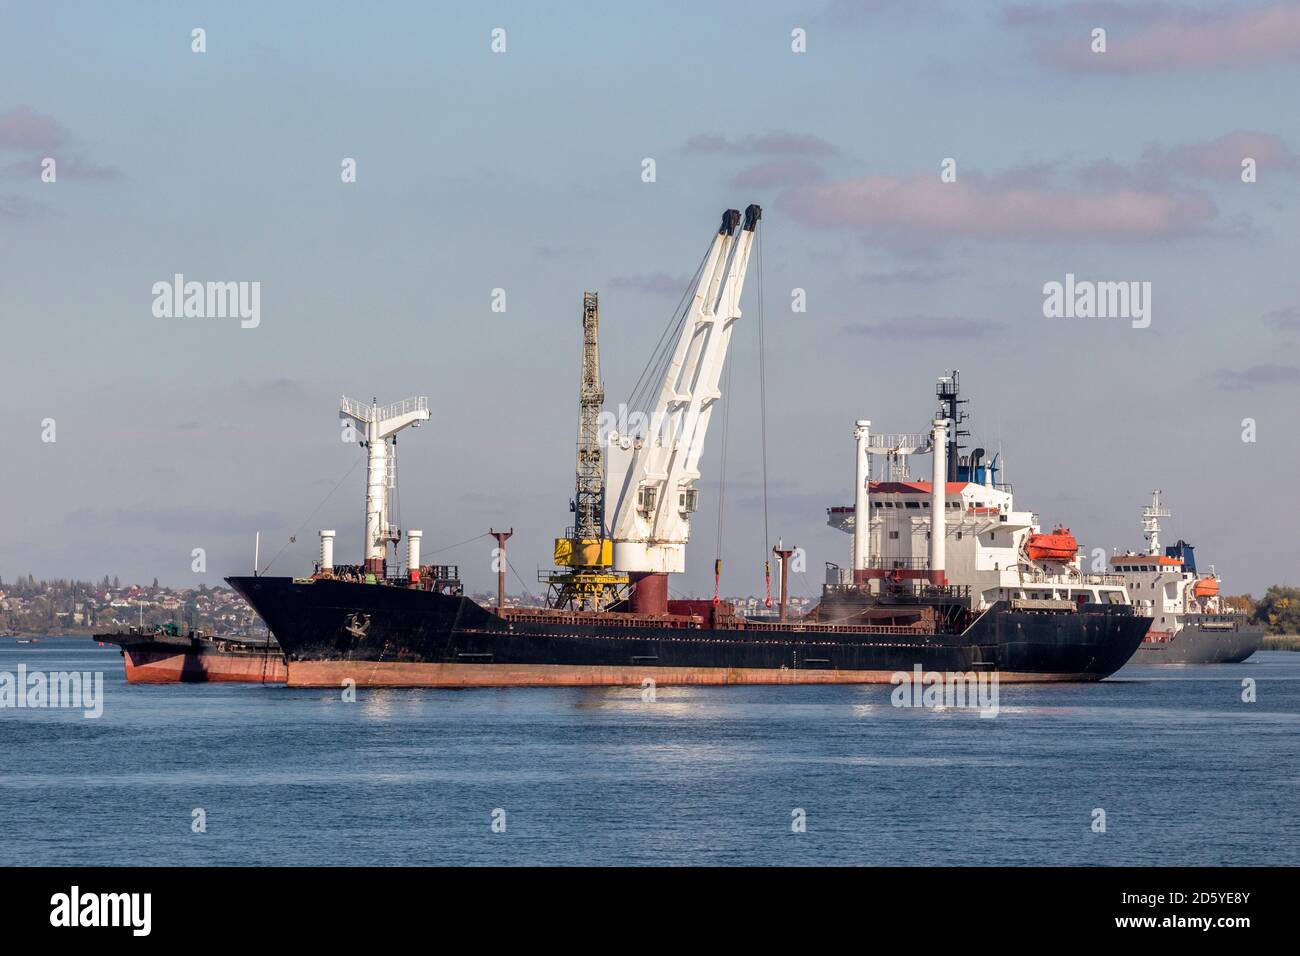 image of a large dry cargo ship on the roadstead of the Dnieper river Stock Photo